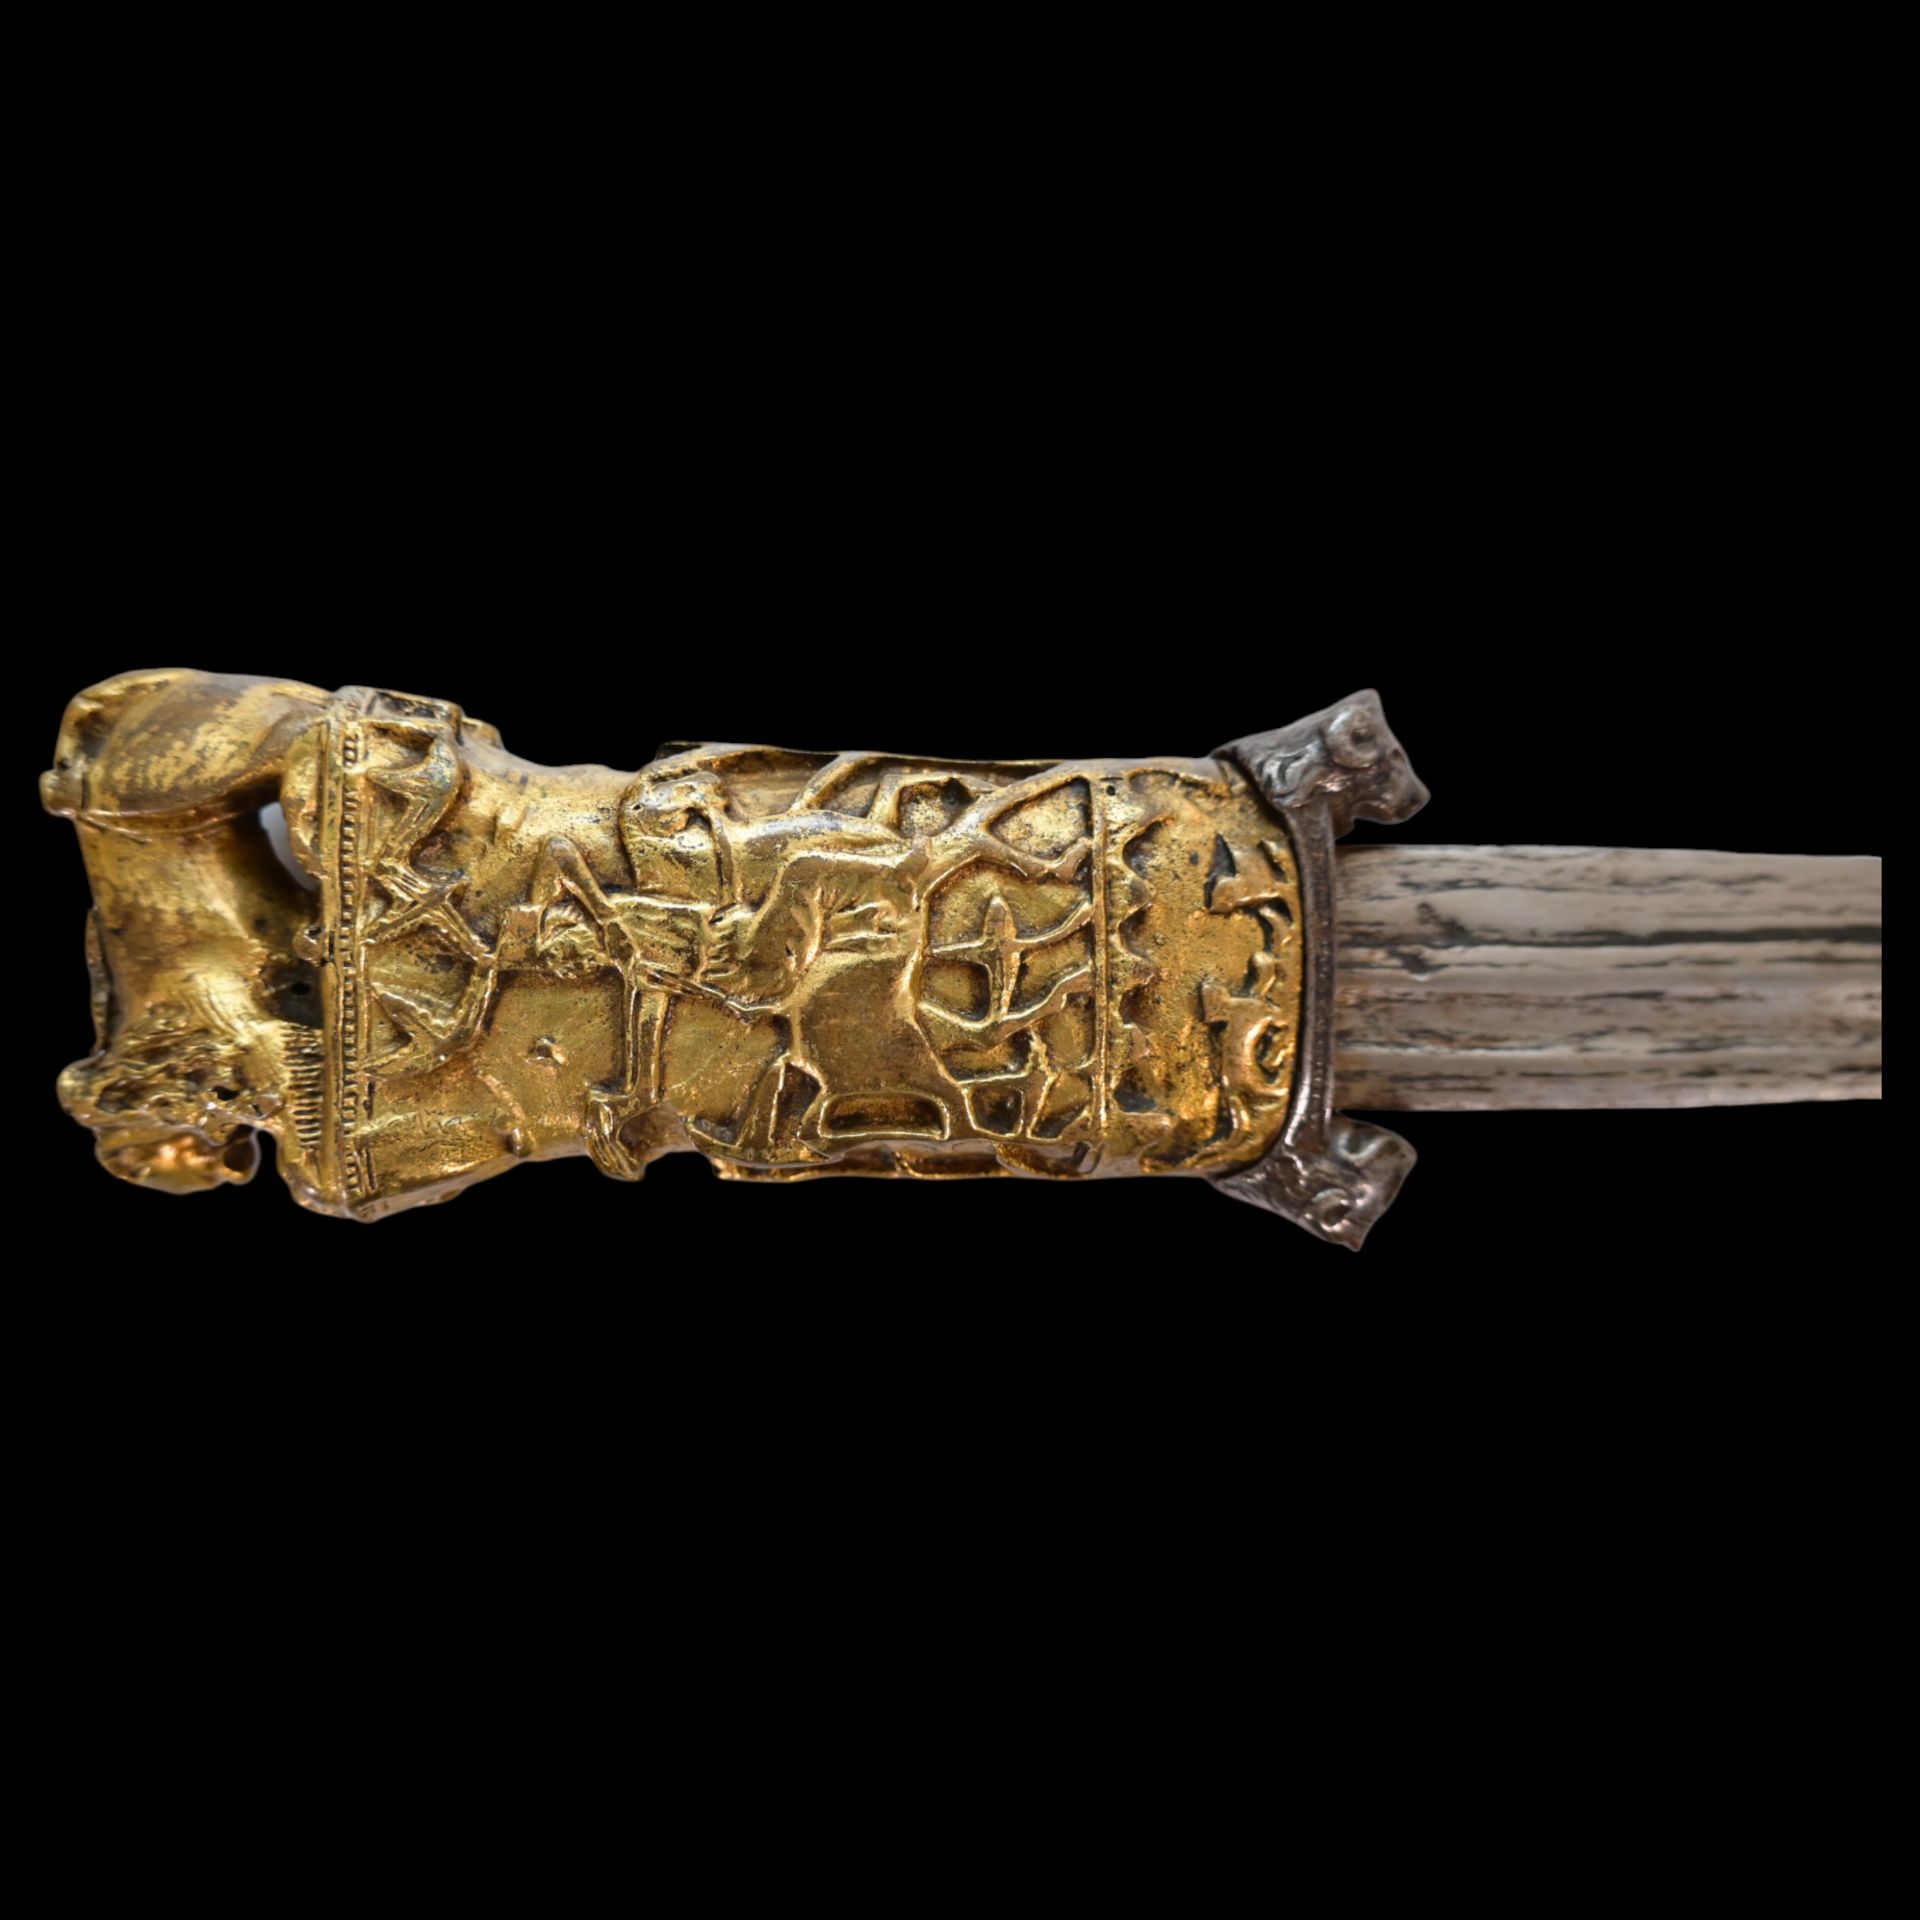 A magnificent dagger, probably from the period of the Crusades, Syria, 10th-13th (?) century. - Image 4 of 11